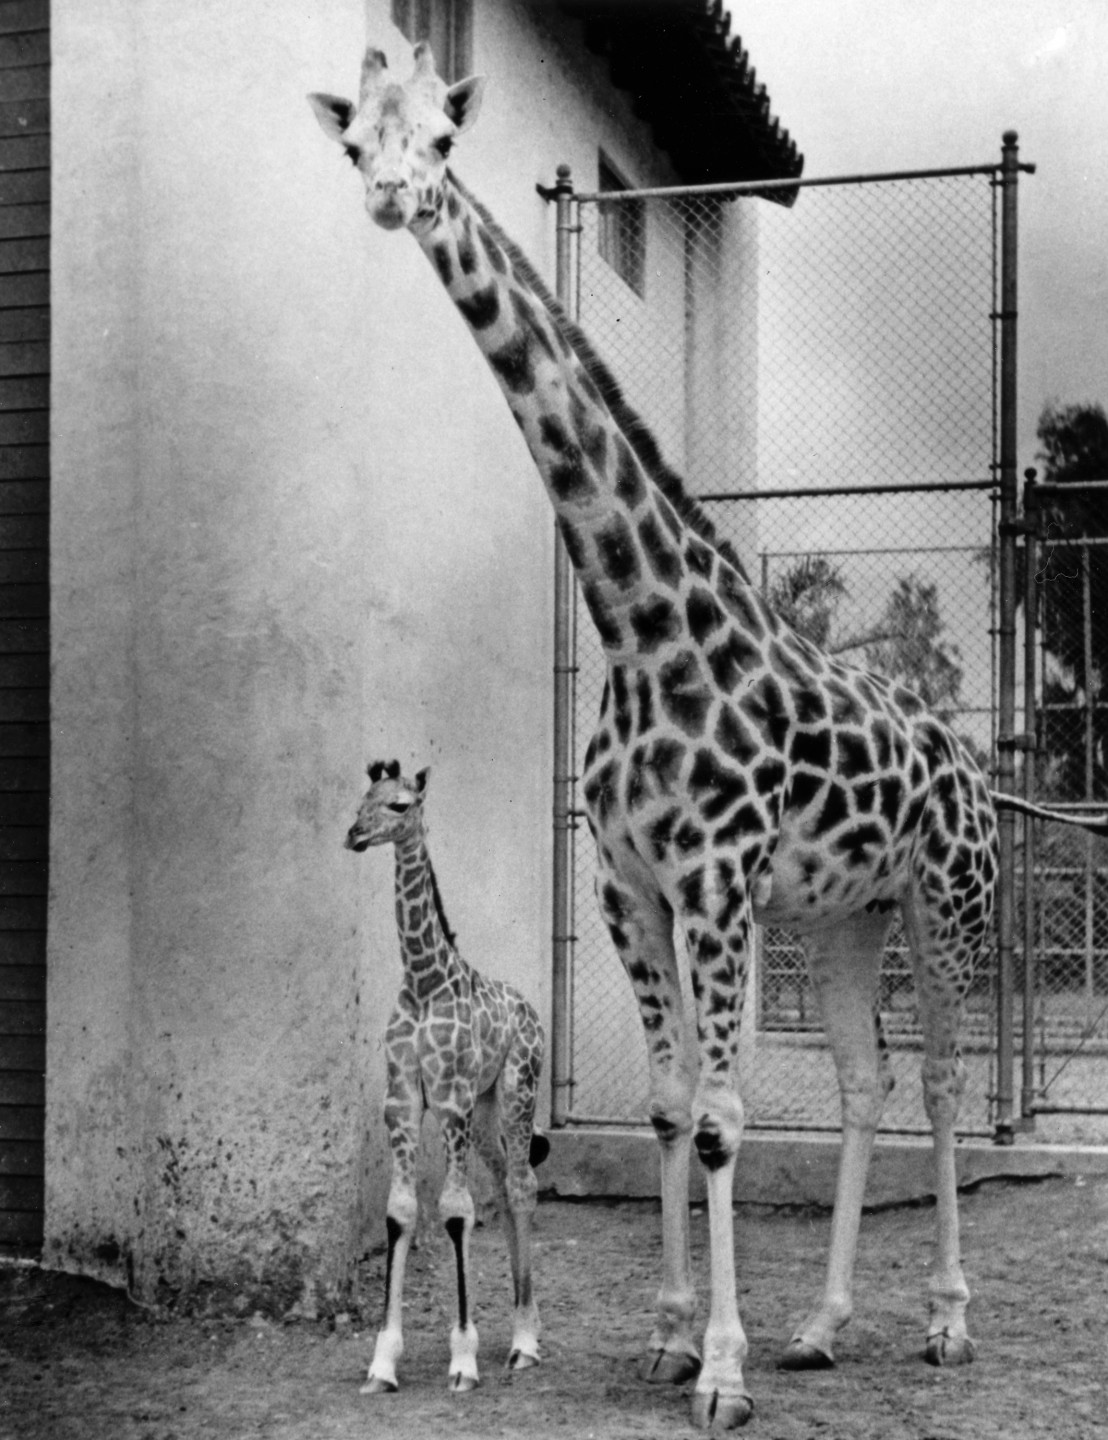 Because he was born on June 6, 1944, the day of the invasion of Normandy, the Zoo's newest giraffe was named D-Day.